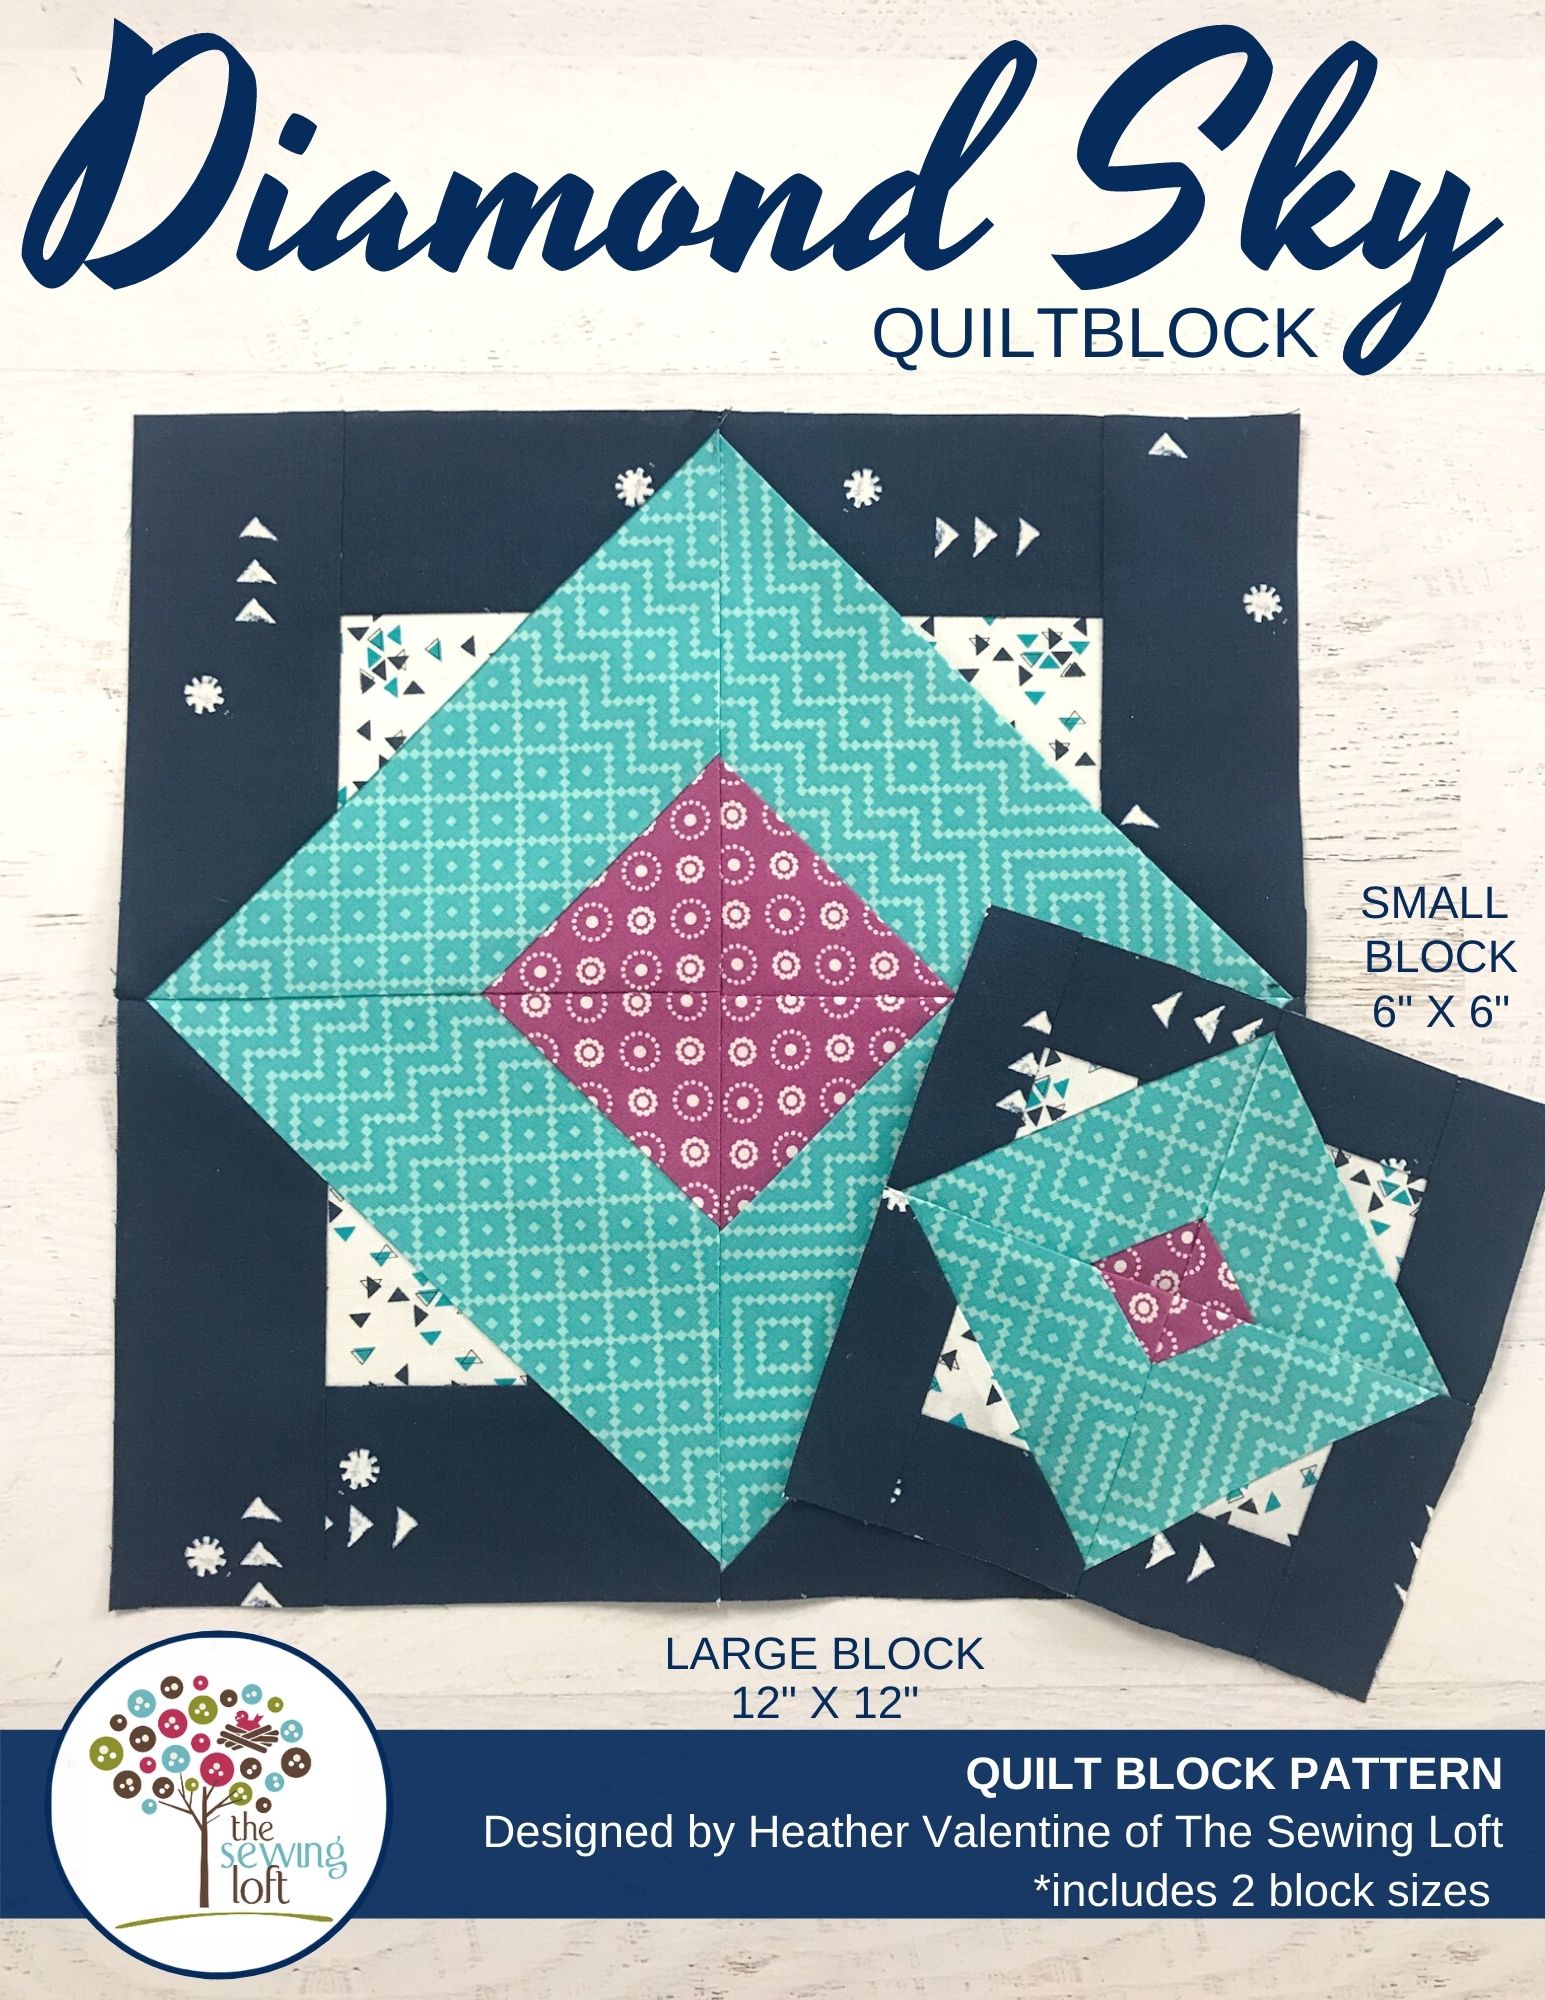 Diamond Sky Quilt Block Pattern by The Sewing Loft